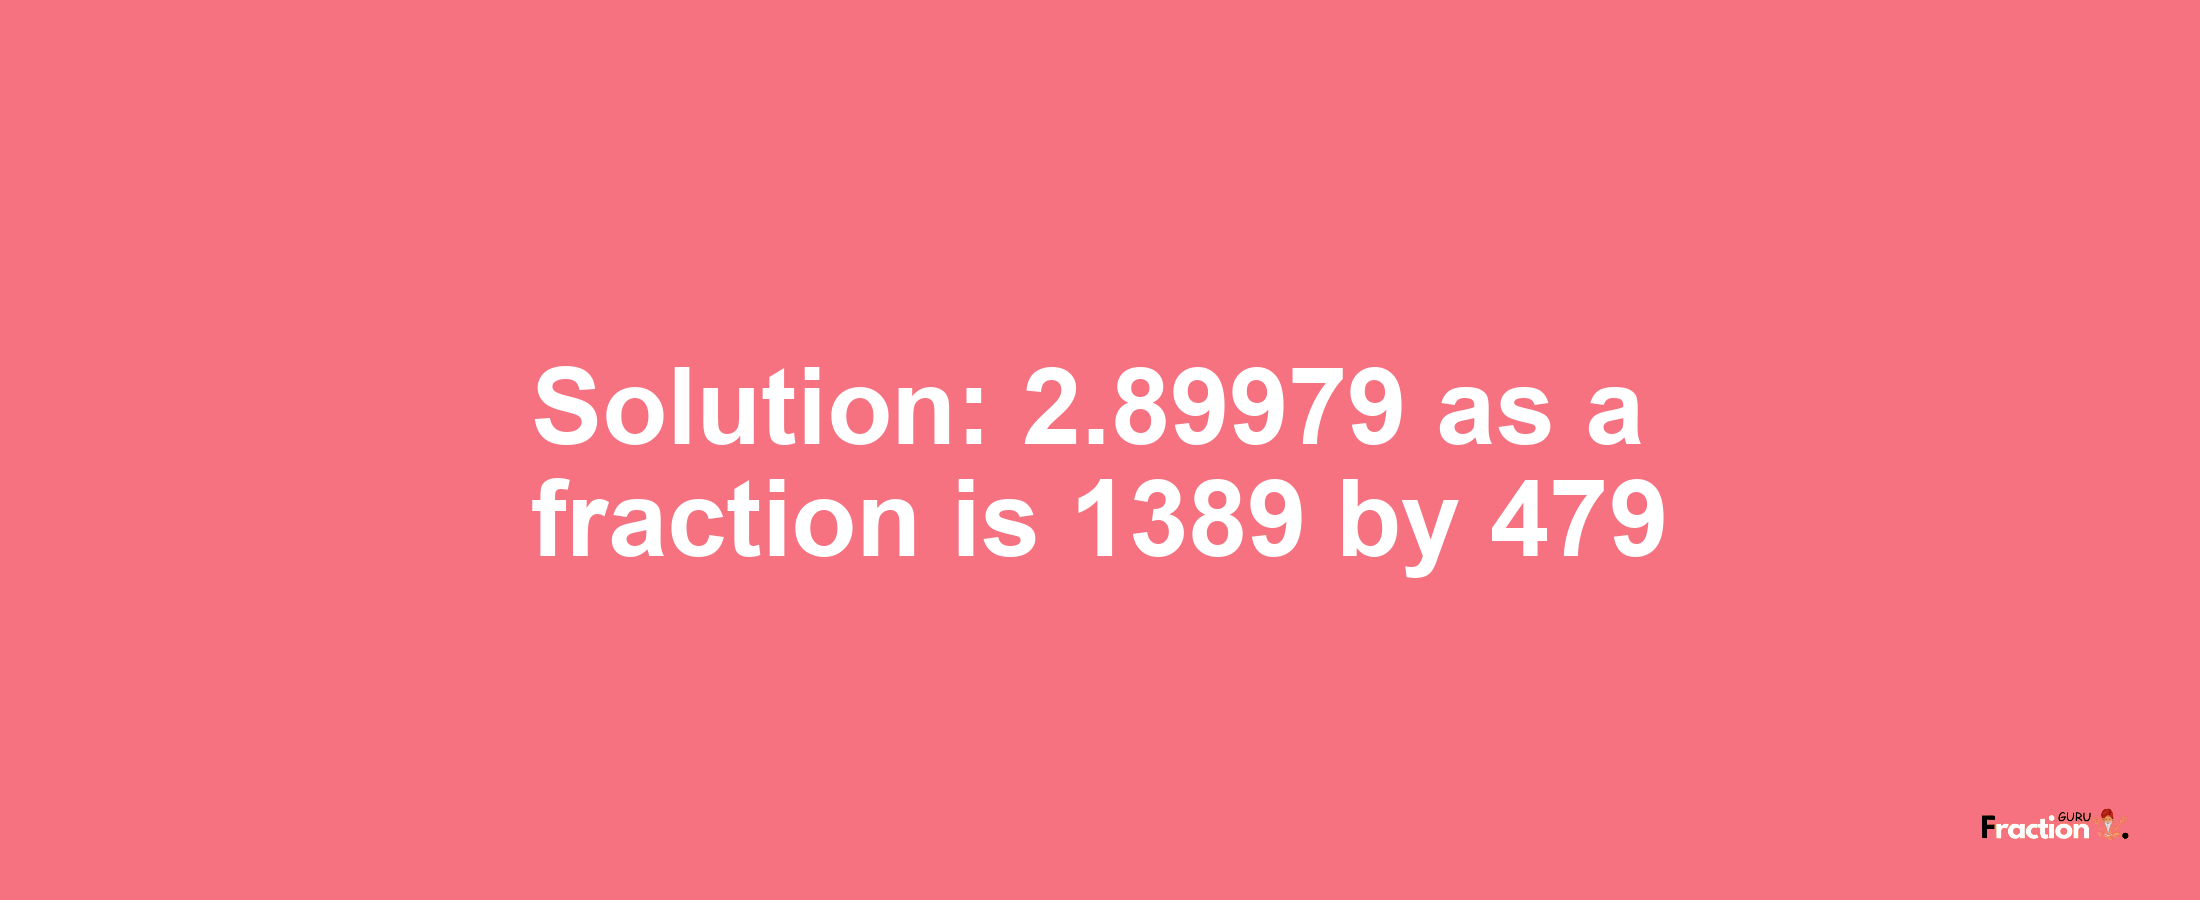 Solution:2.89979 as a fraction is 1389/479